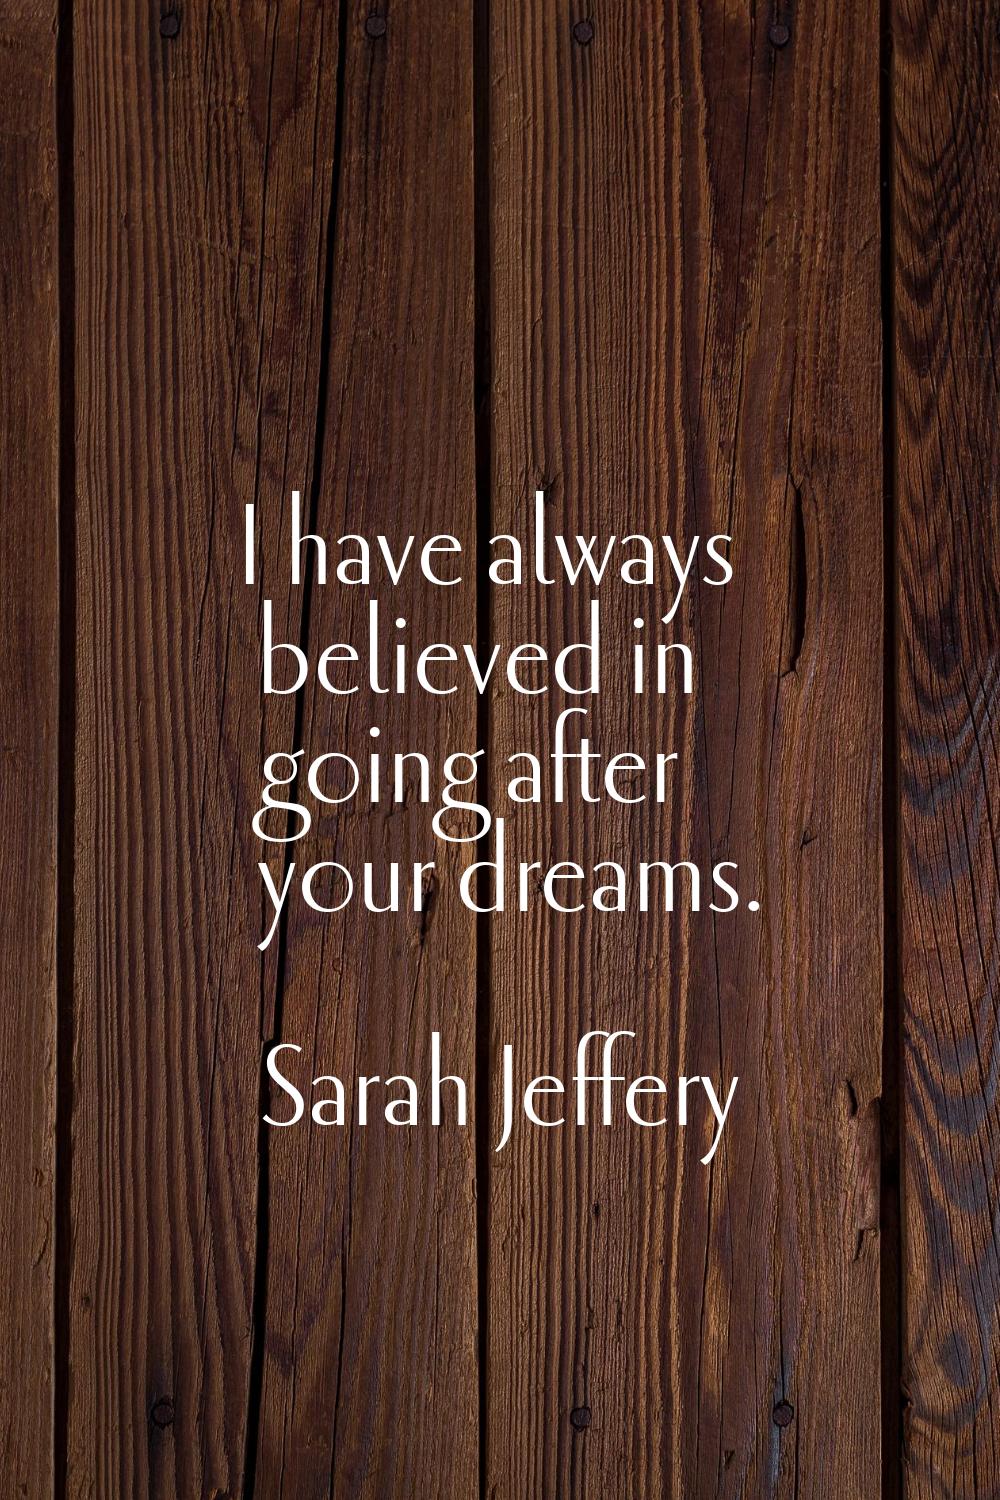 I have always believed in going after your dreams.